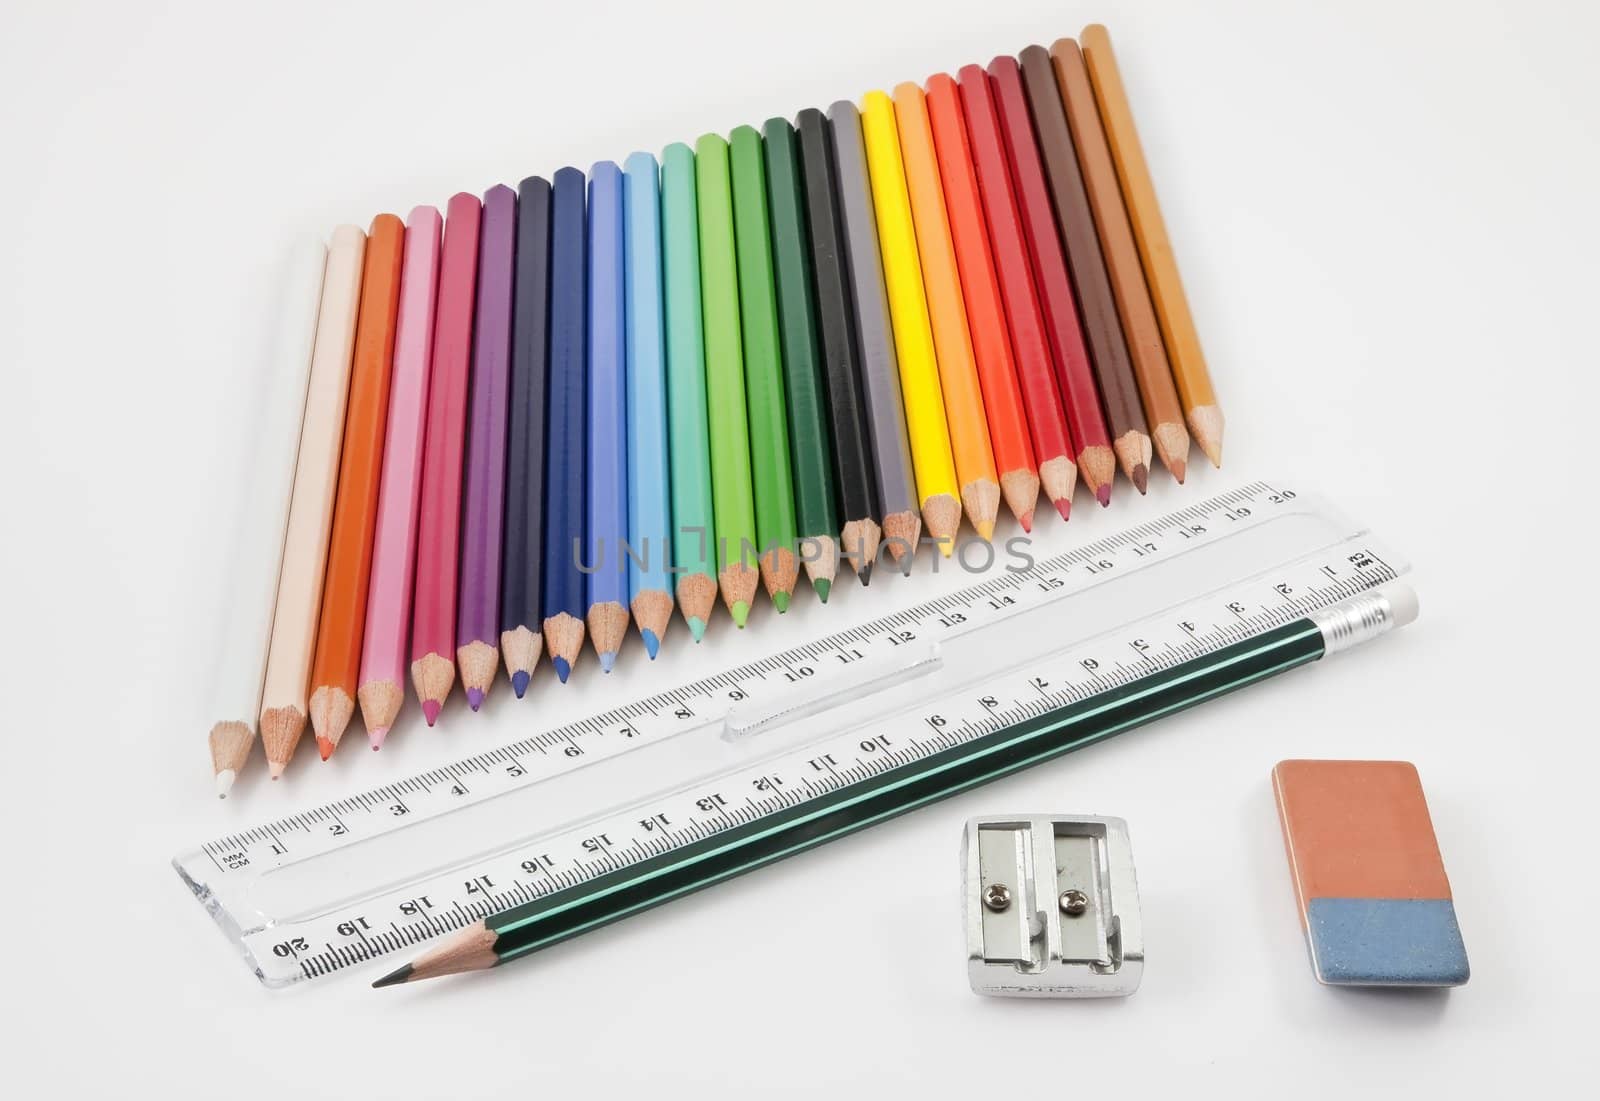 Very tidy basic school supplies on a white background